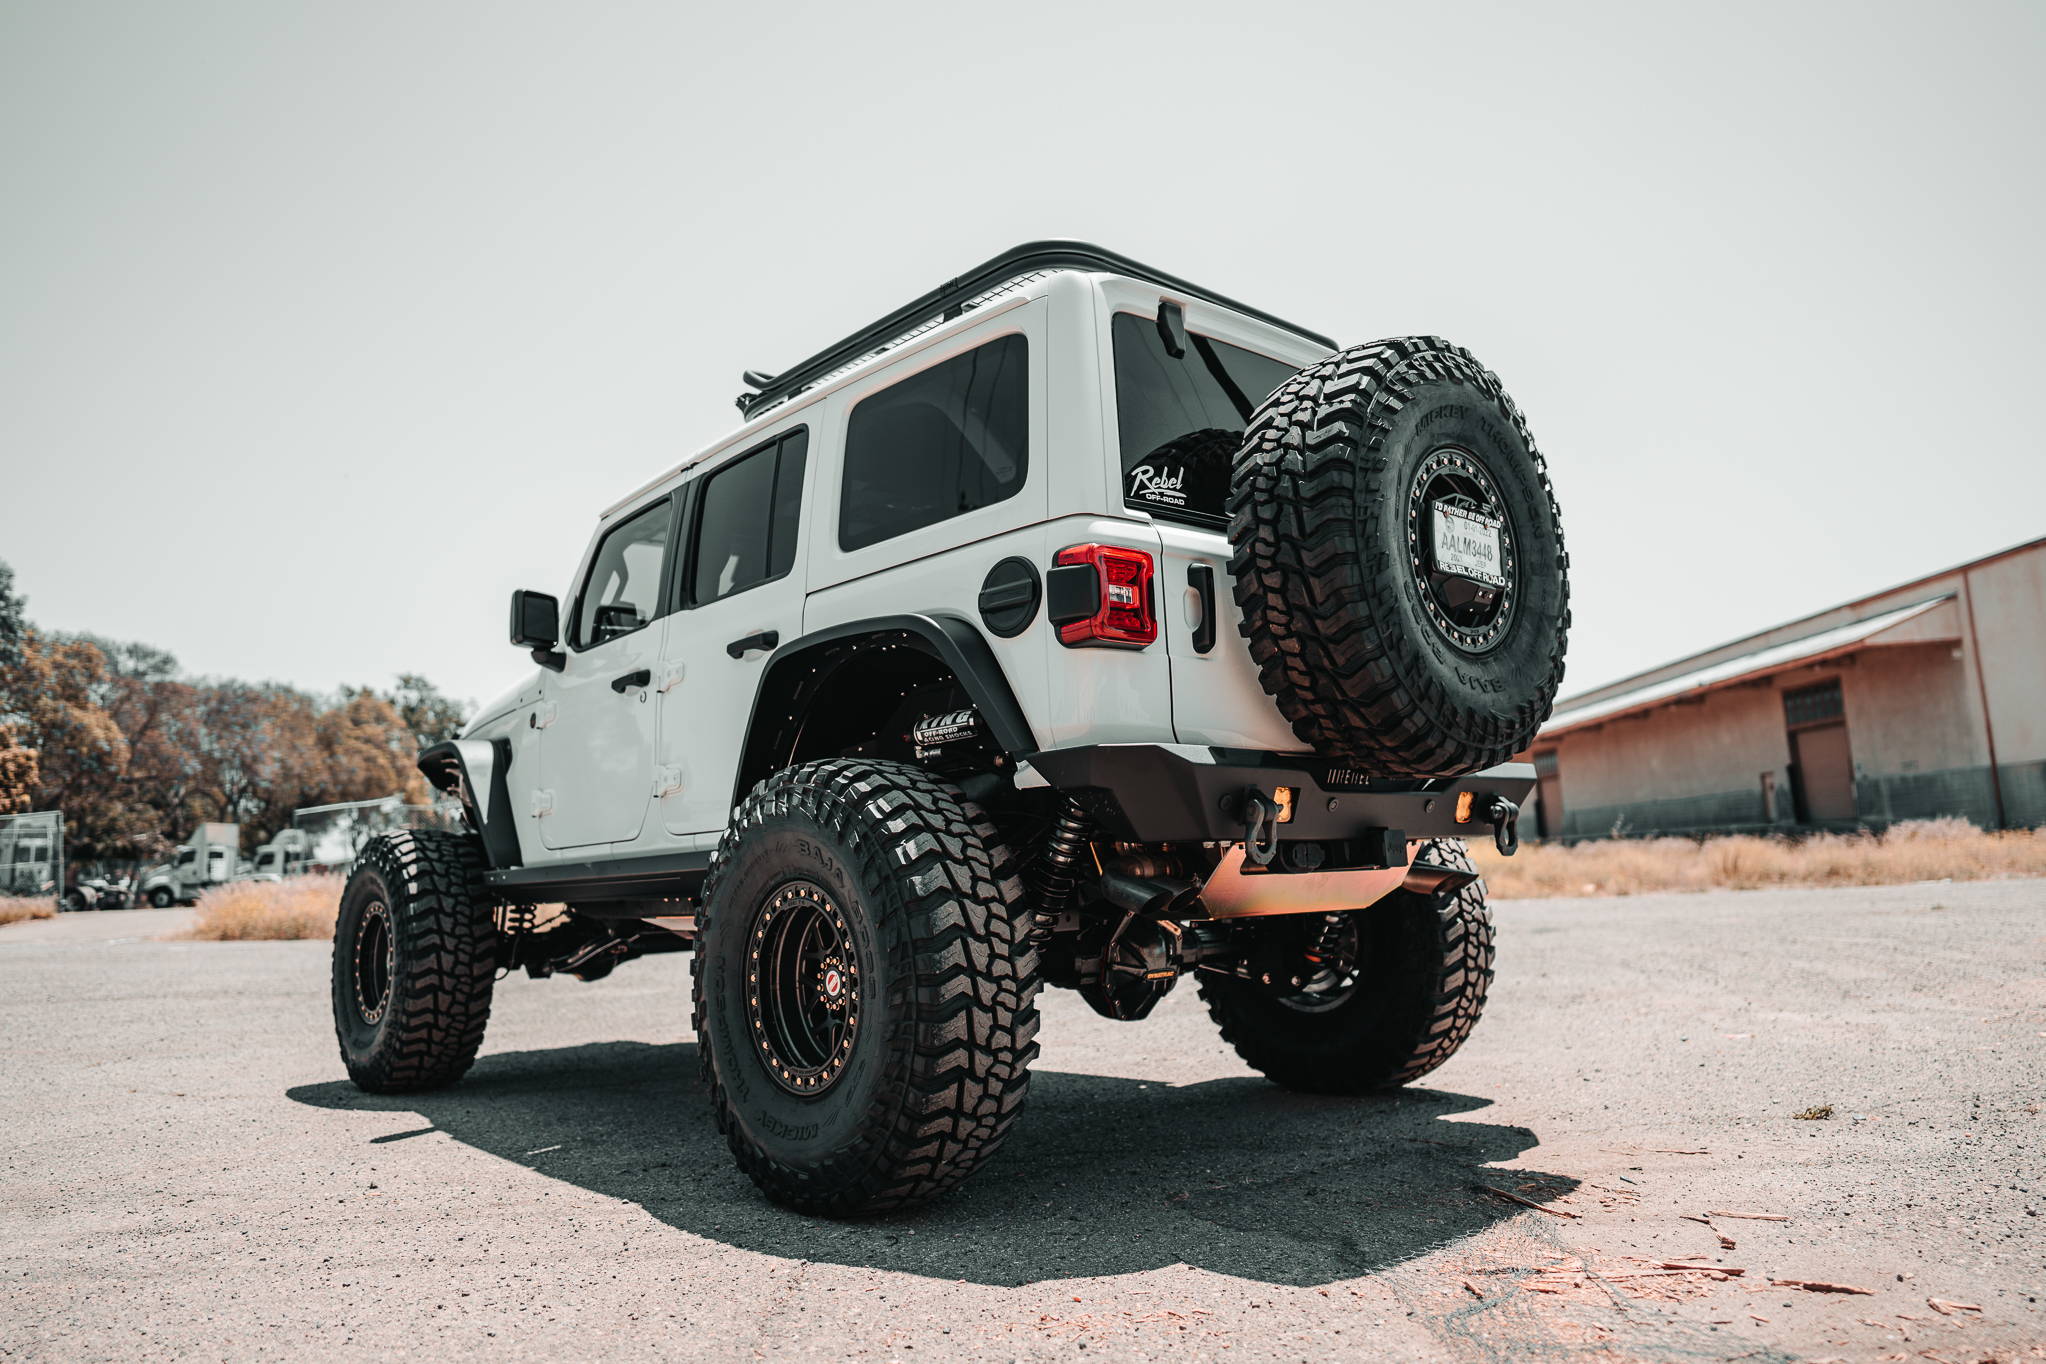  392 Jeep Wrangler Built By Rebel Off Road 